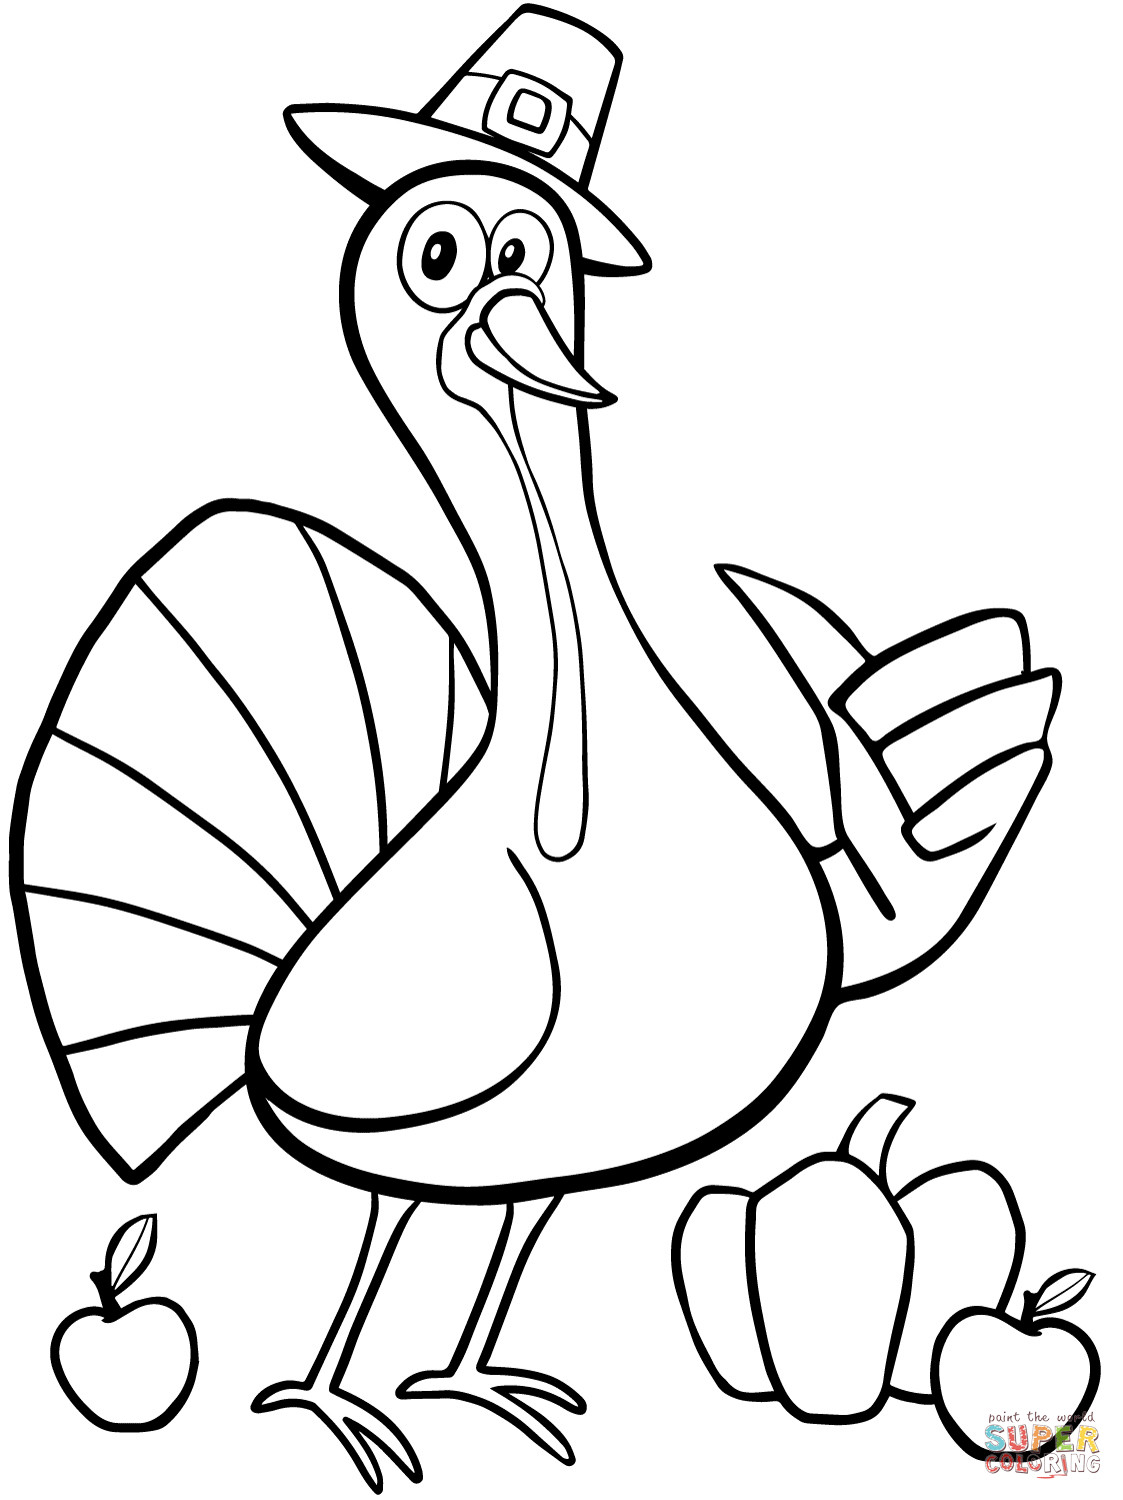 Thanksgiving Turkey Coloring Pages Printables
 Cool Thanksgiving Turkey coloring page